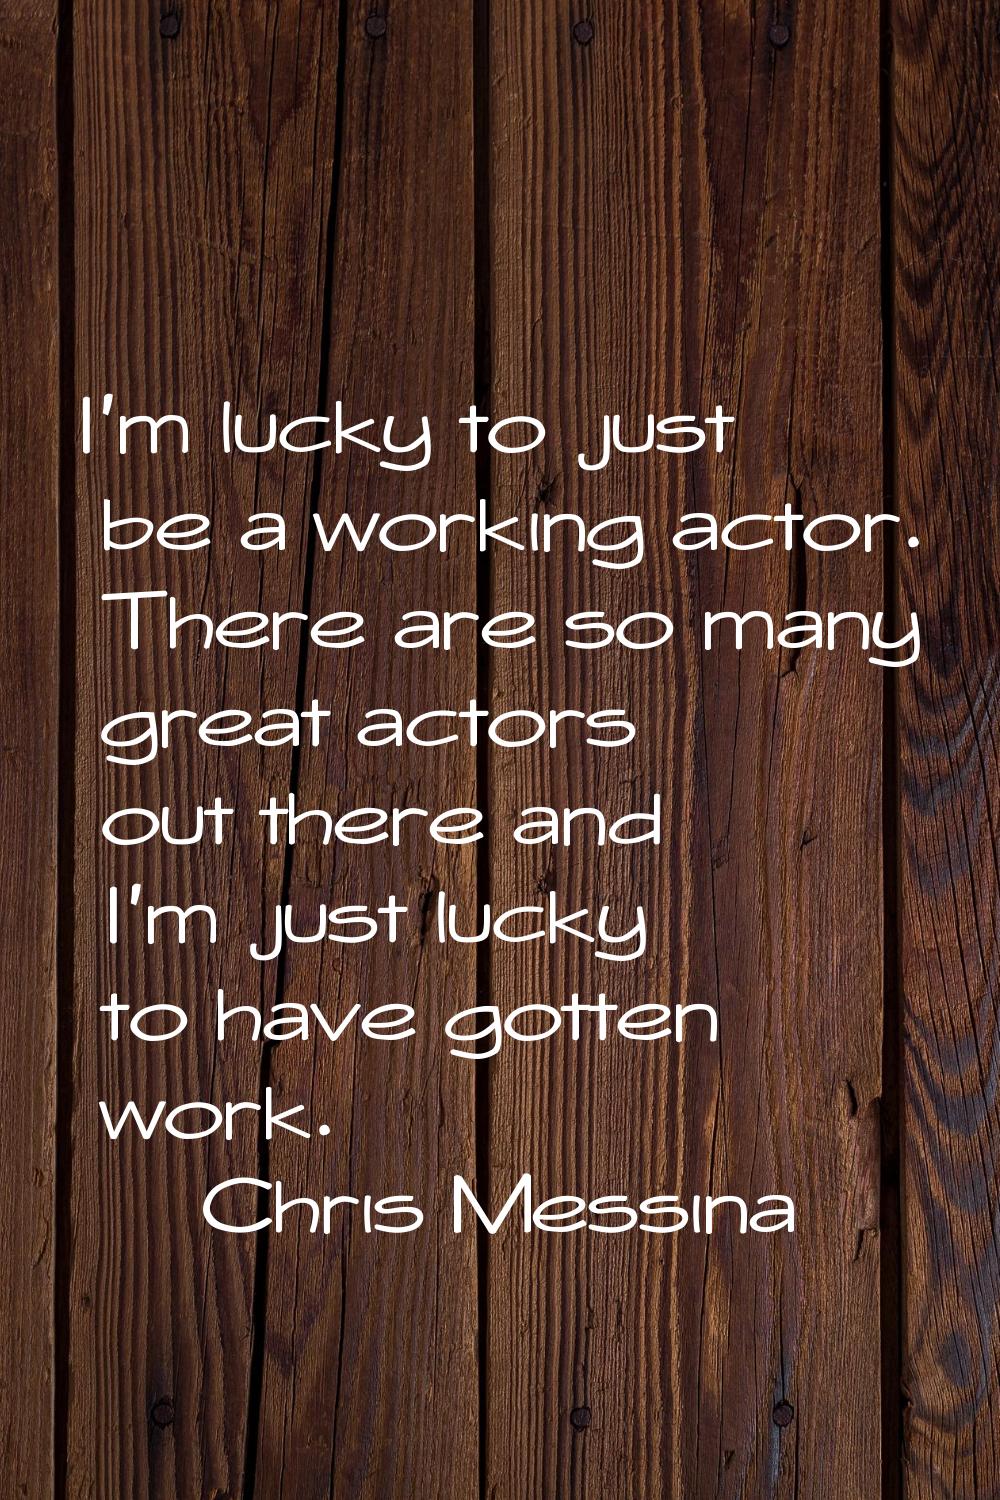 I'm lucky to just be a working actor. There are so many great actors out there and I'm just lucky t